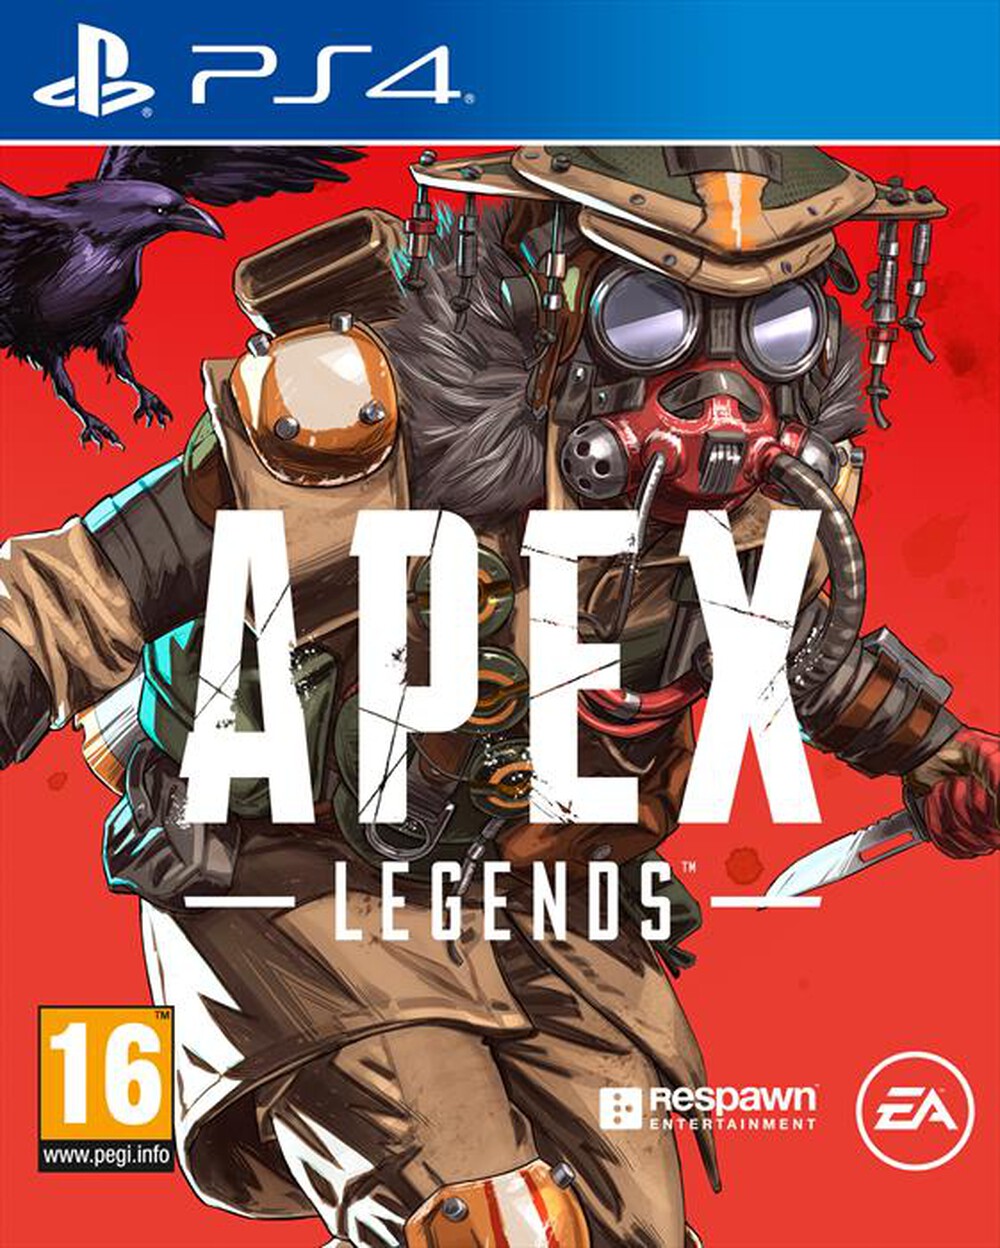 "ELECTRONIC ARTS - APEX LEGENDS - BLOODHOUND EDITION PS4 - "